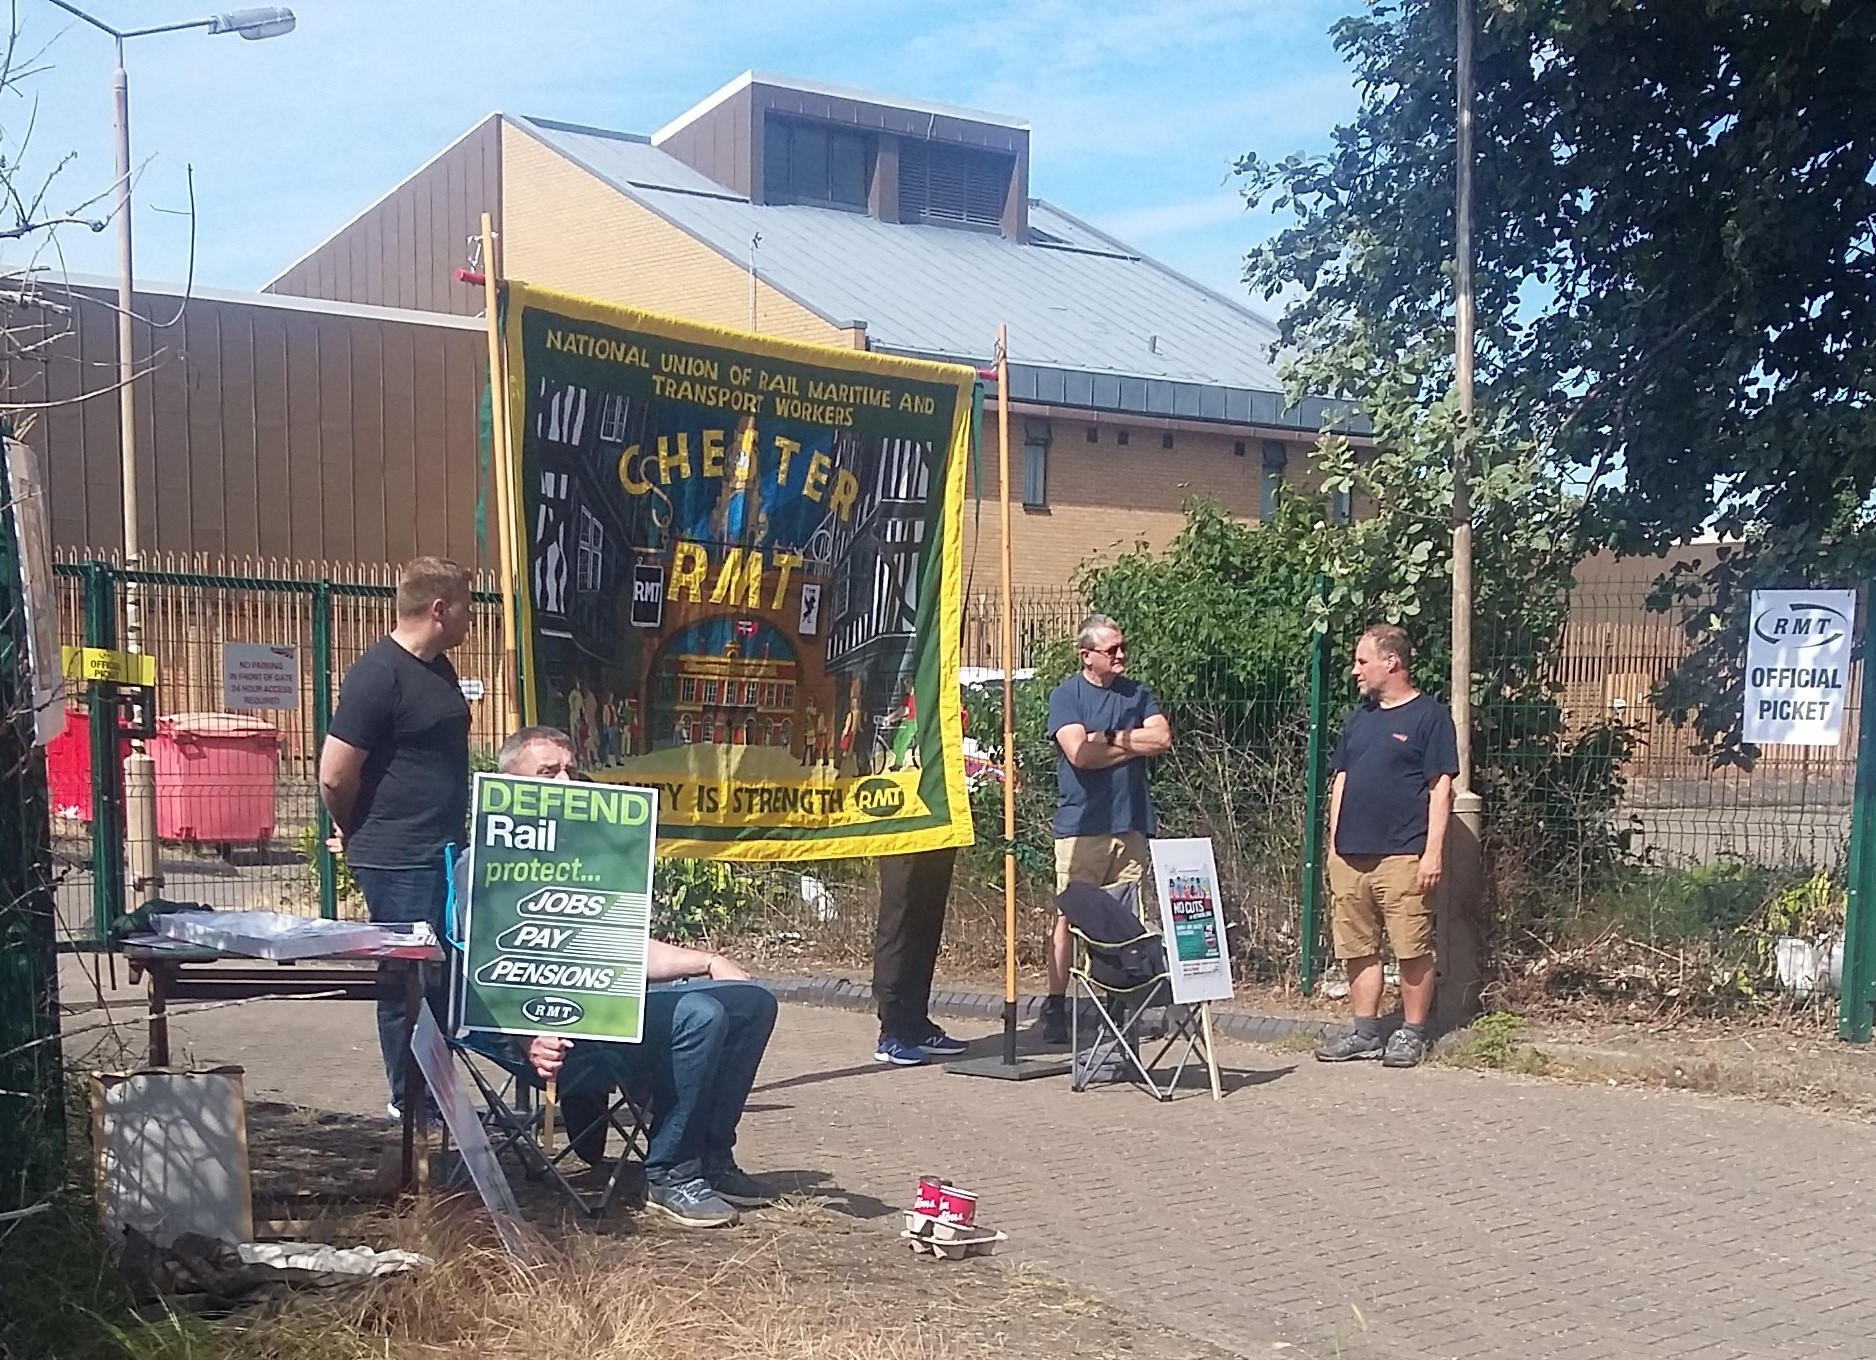 Chester RMT Branch members holding strike action near Chester Railway station on Tuesday. Pictures: Ray McHale.